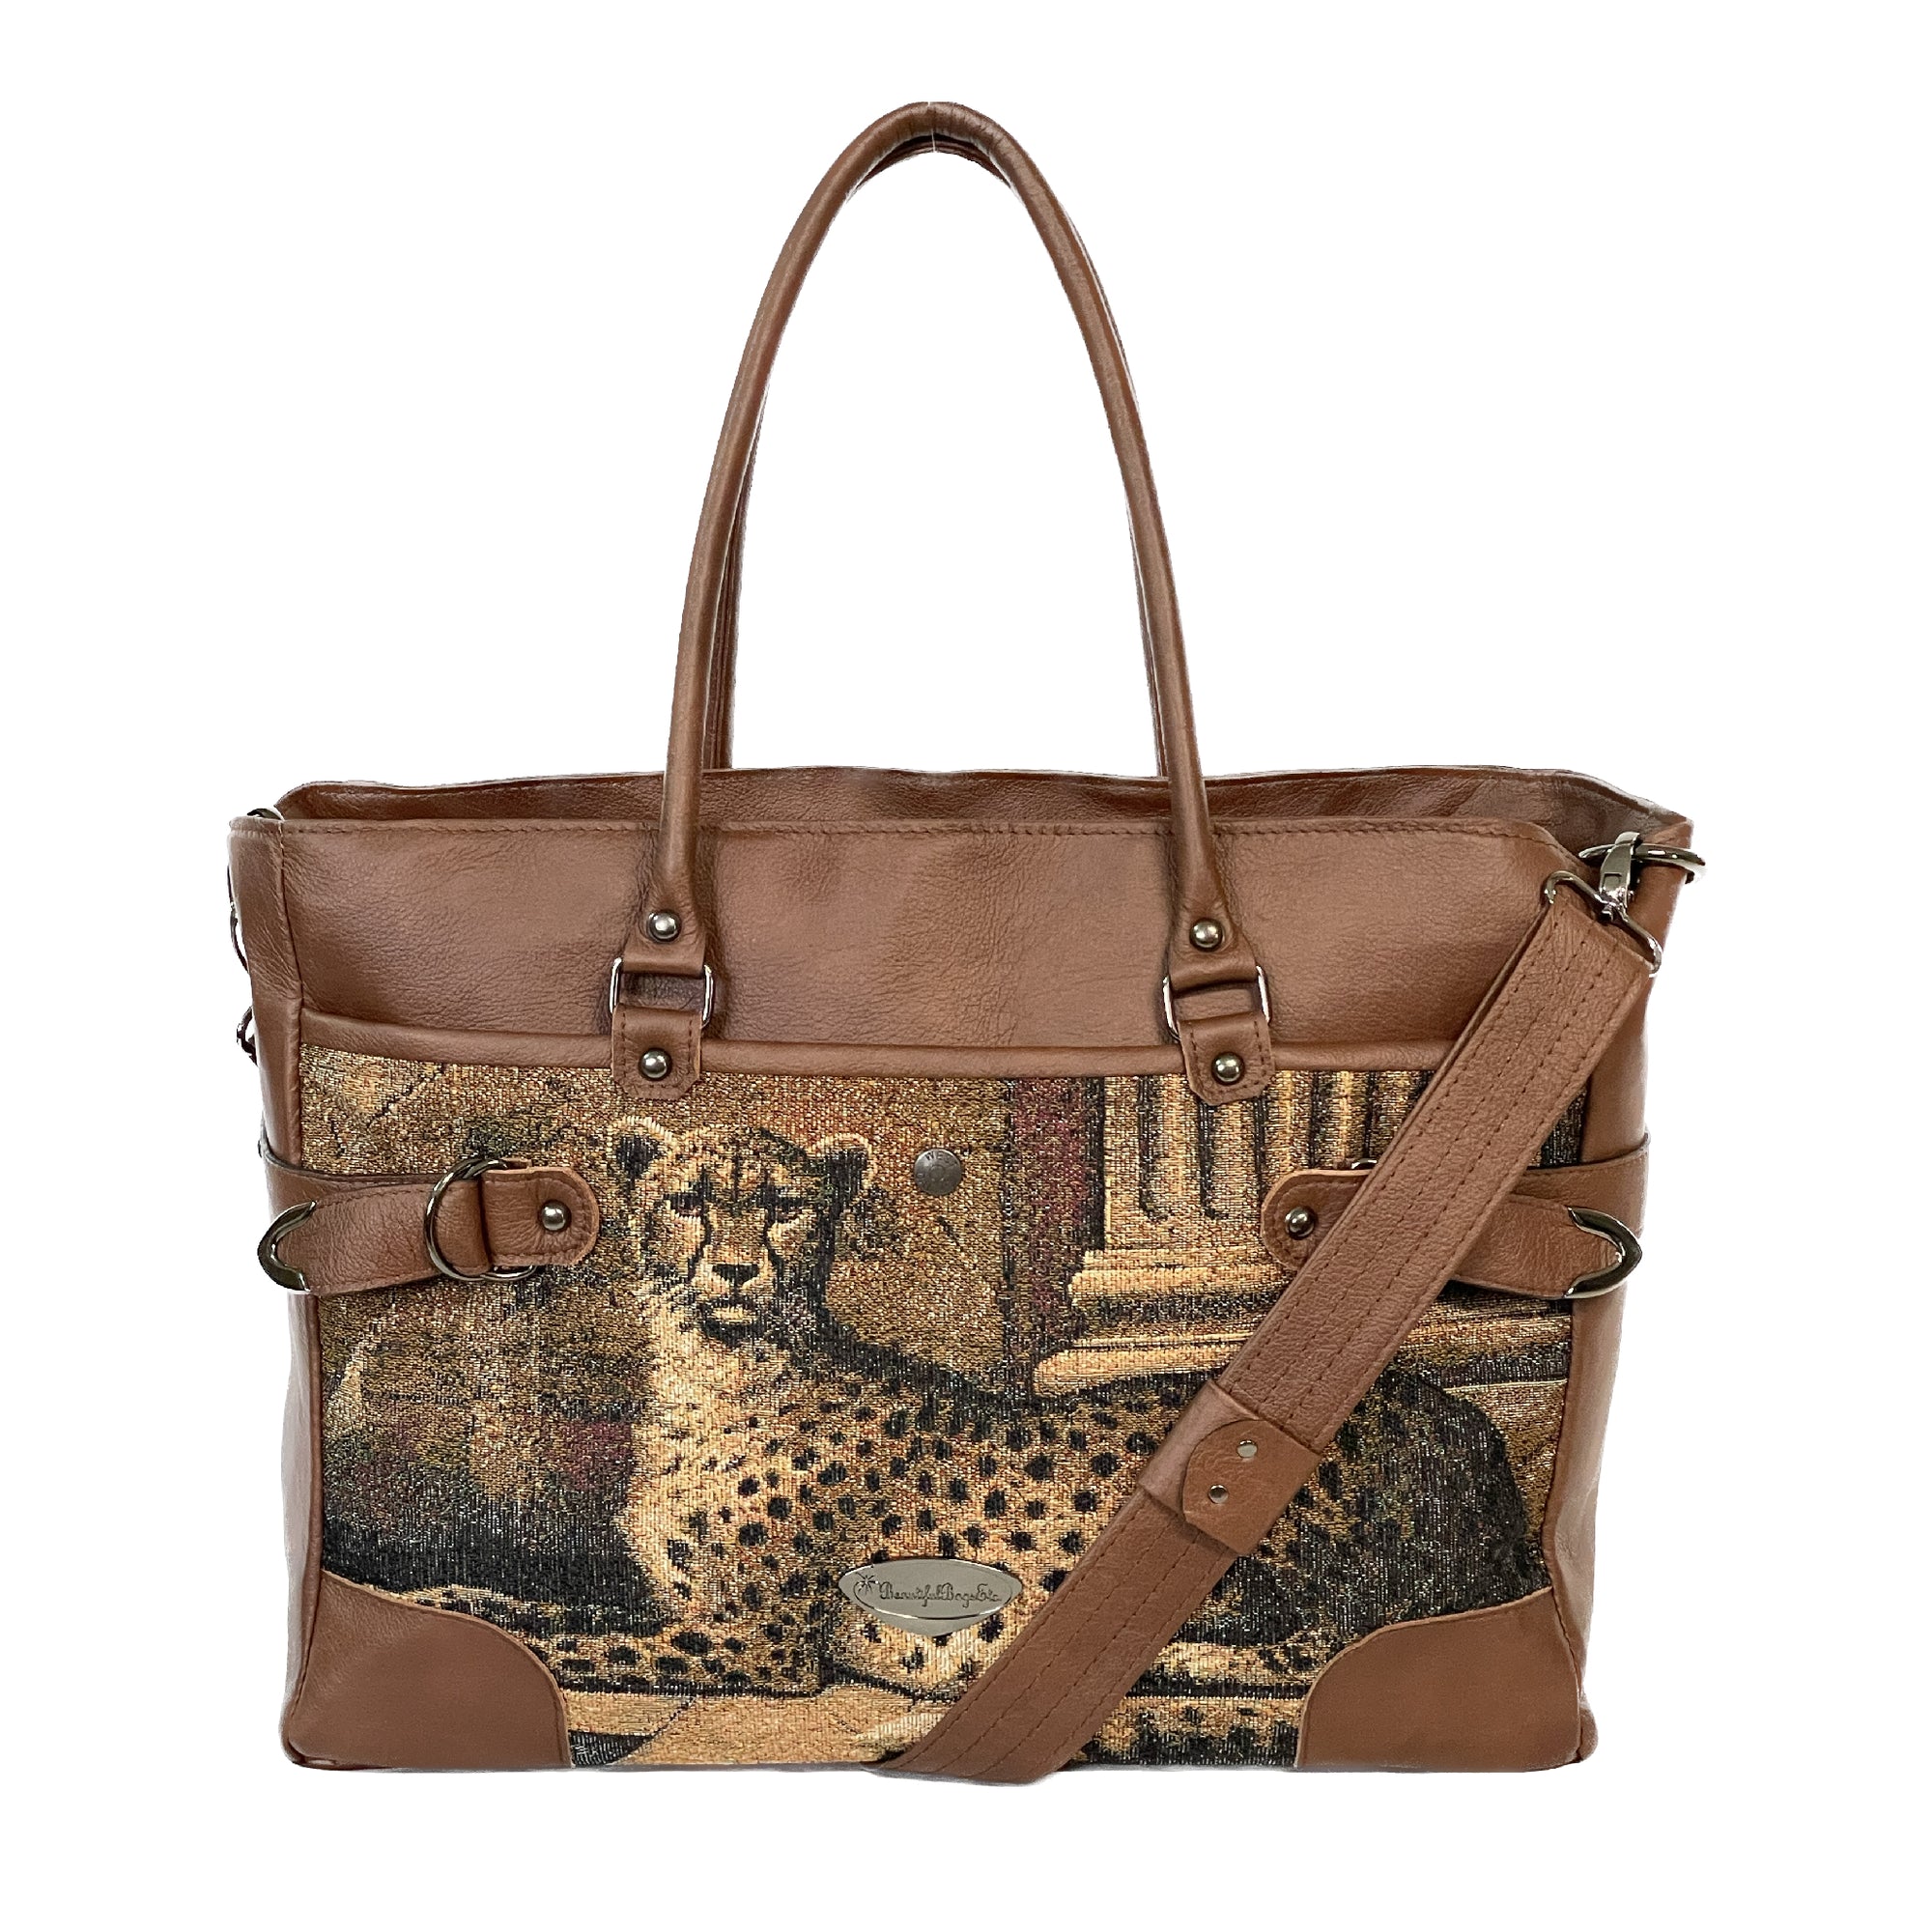 Teacher's Tote Cheetah and Leather